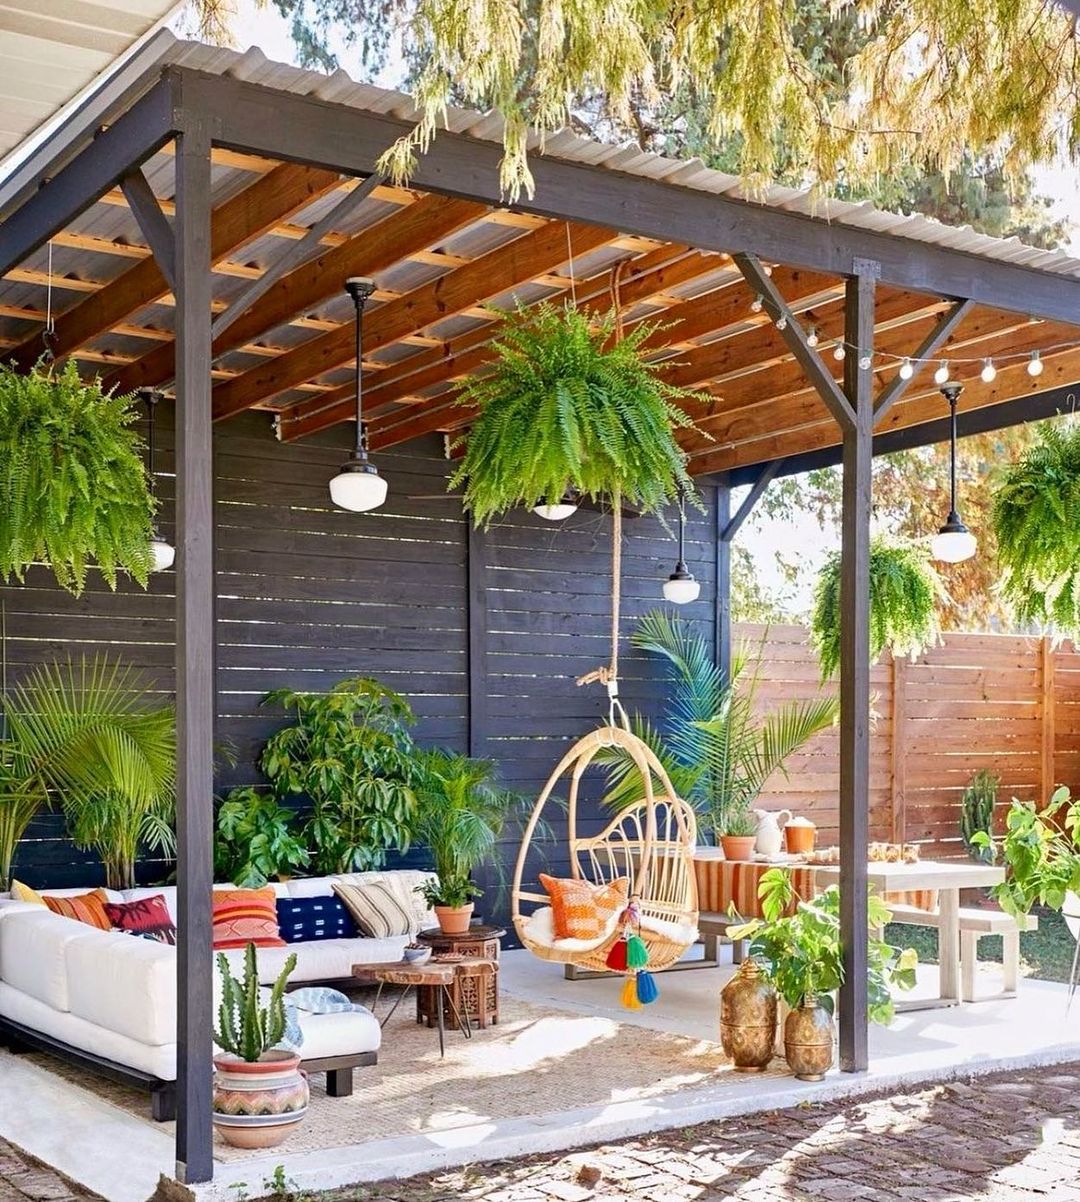 A backyard patio covered by a pergola. Photo by Instagram user @racheldianaestates